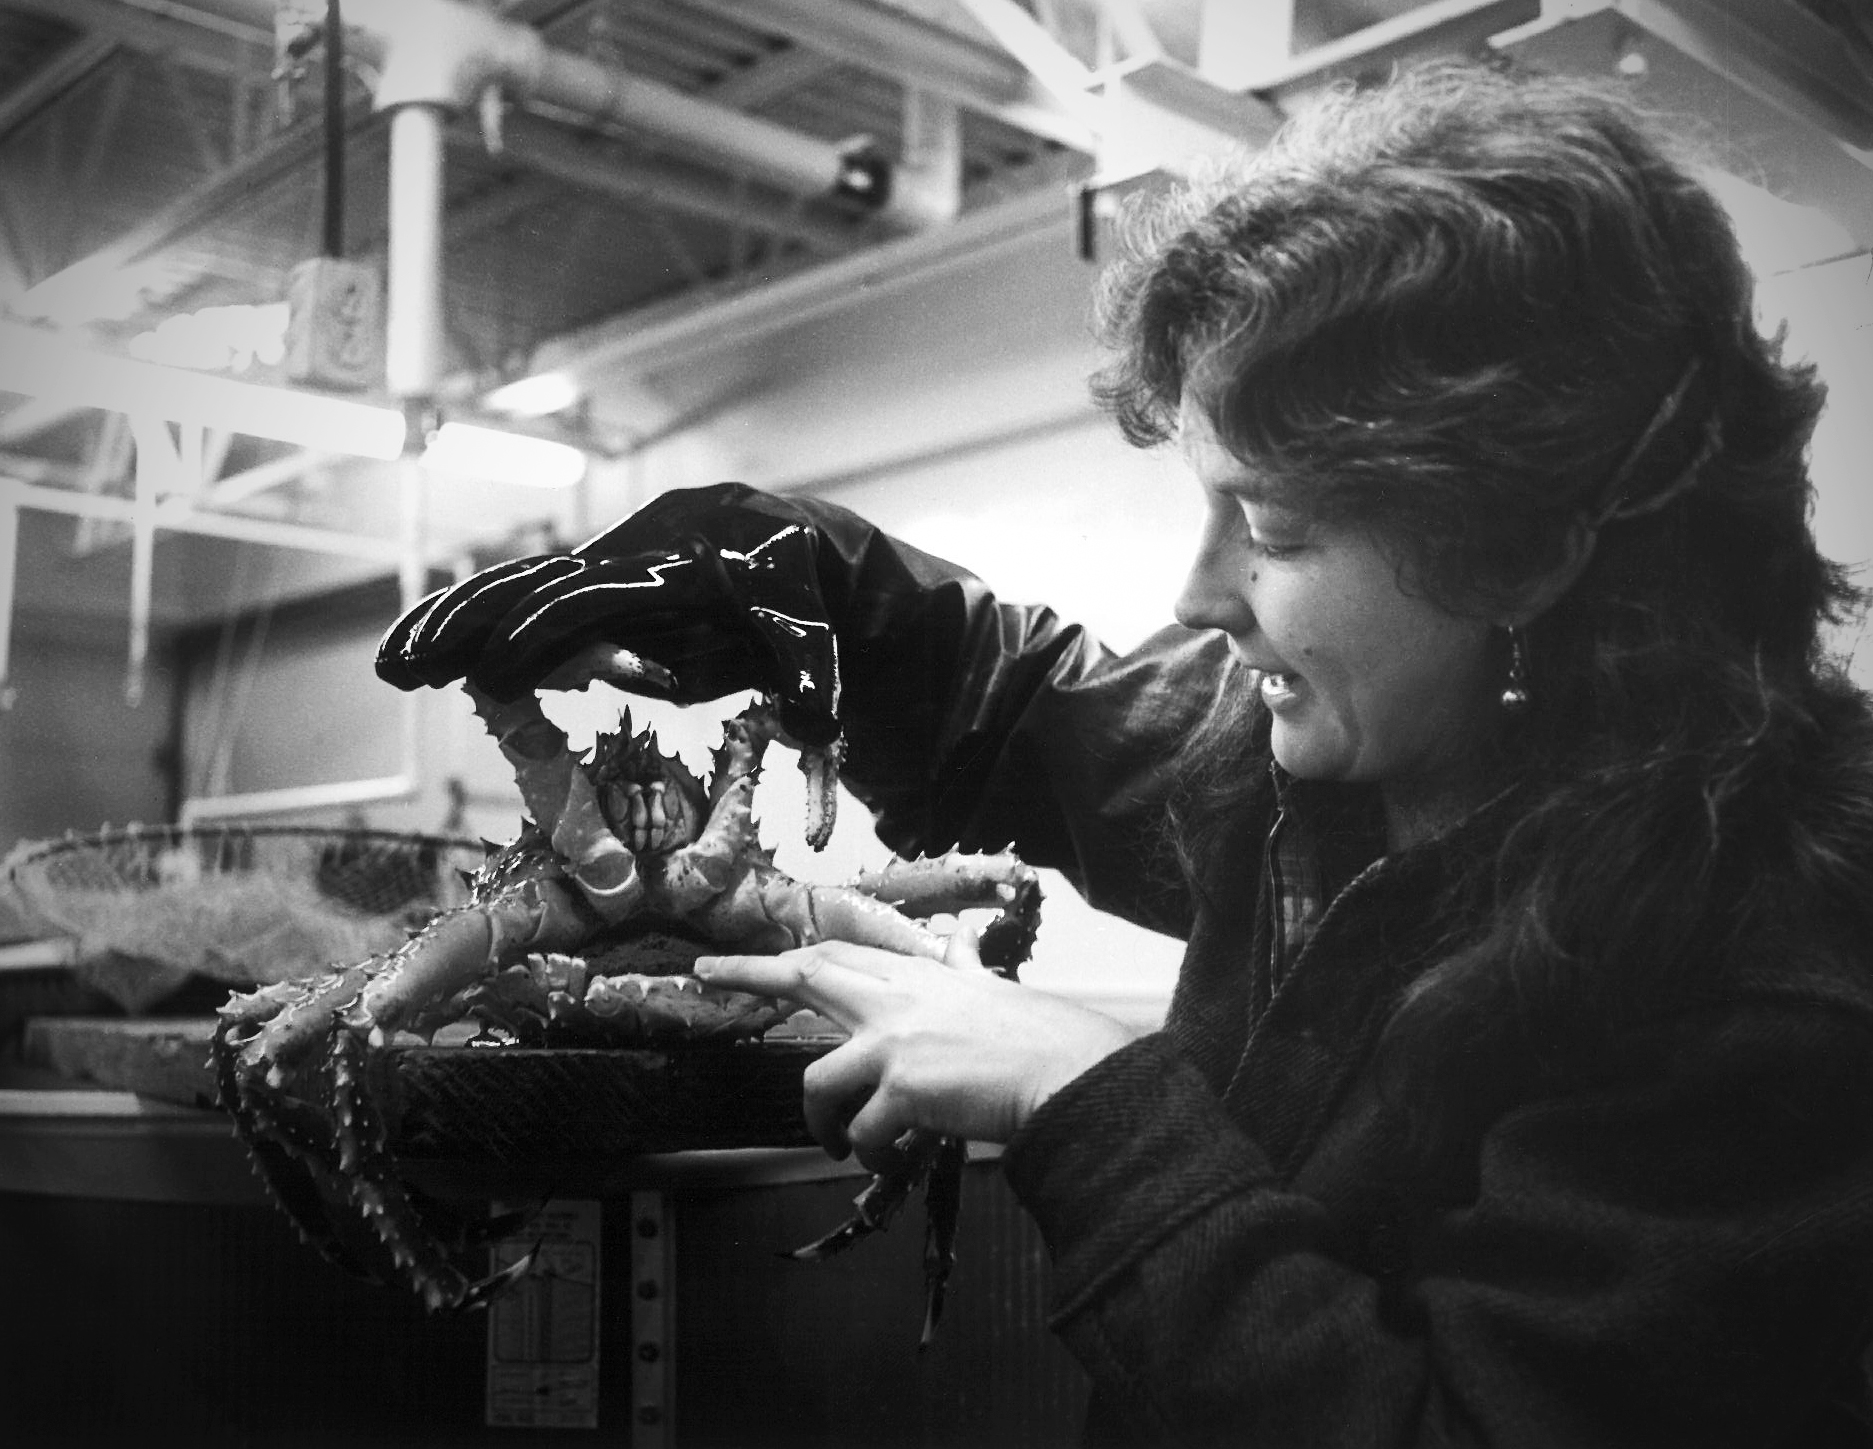 Photo courtesy of the Seward Marine Center. Judy McDonald Paul shows the egg clutch of a red king crab in SMC’s Hood Laboratory. Scientists used the lab’s seawater system to study the reproductive biology of crabs to aid in fisheries management.